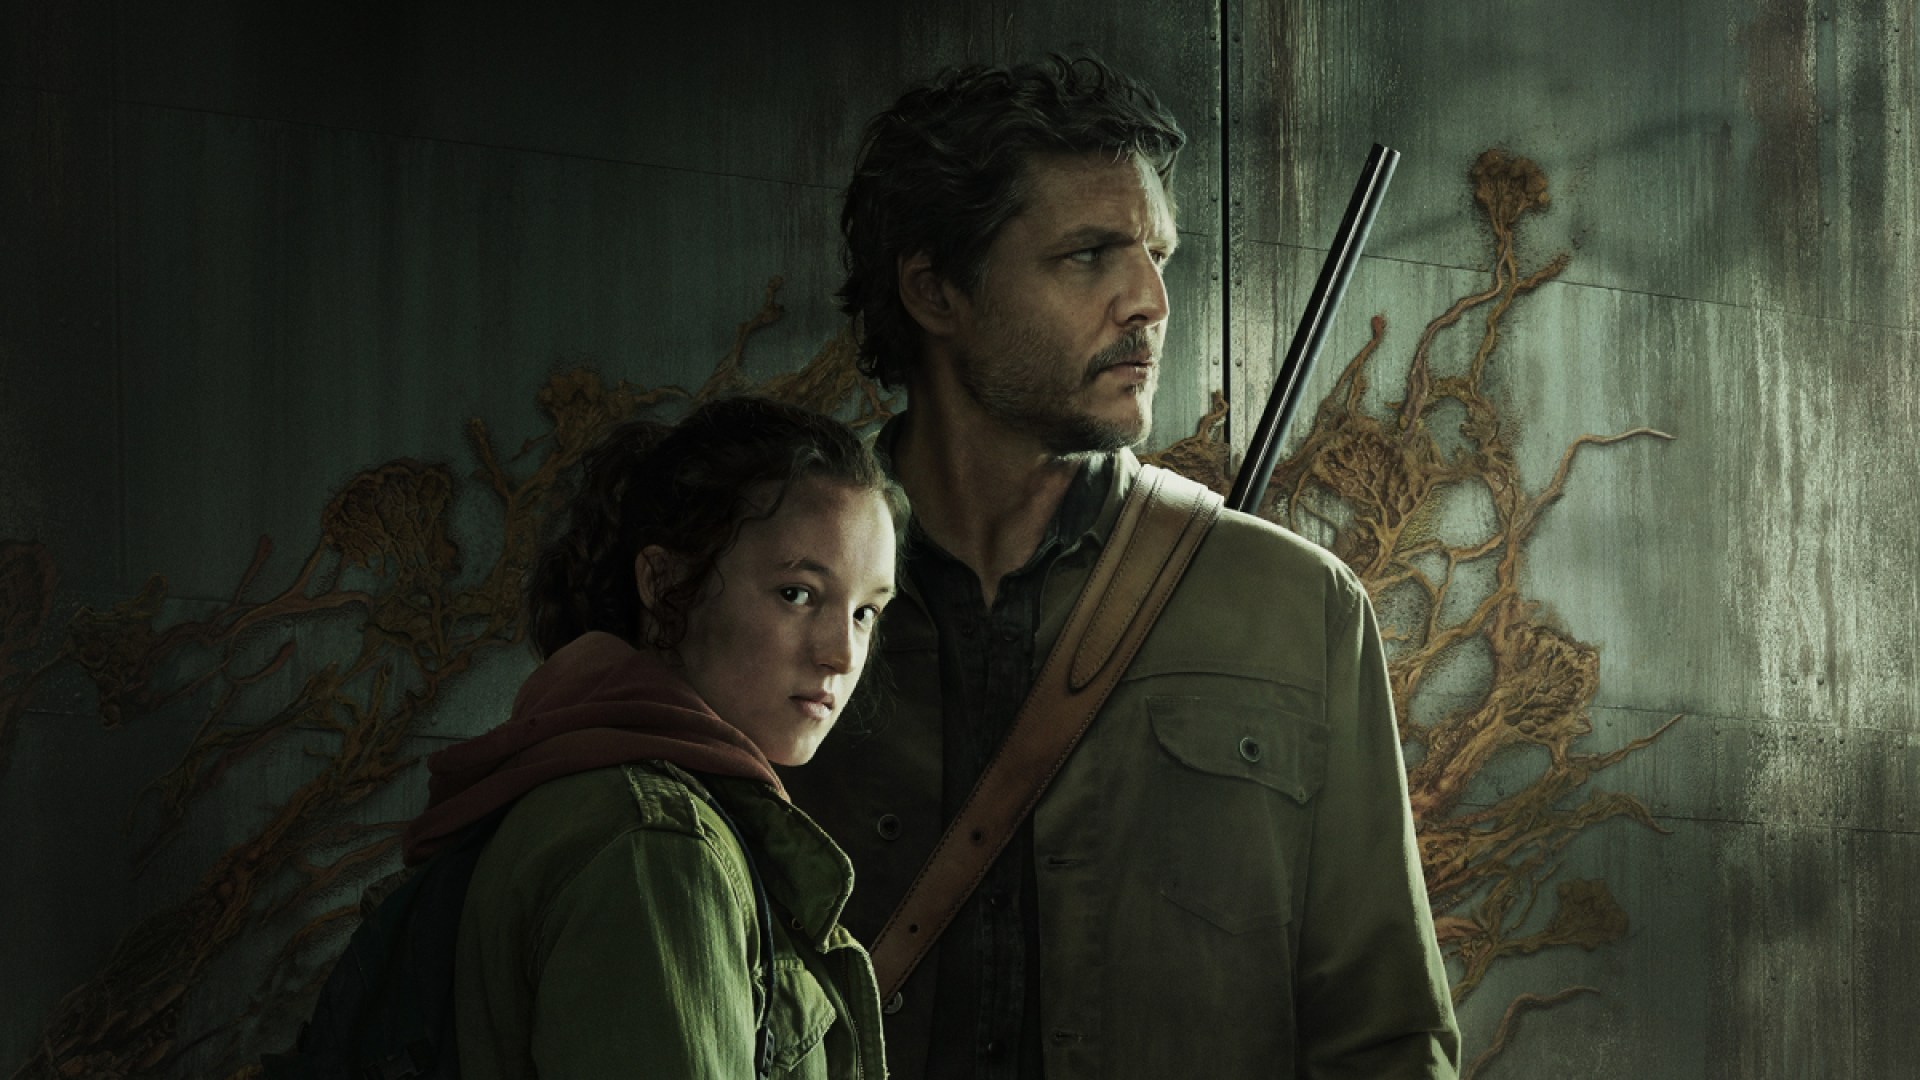 Bella Ramsey as Ellie and Pedro Pascal as Joel in key art for HBO